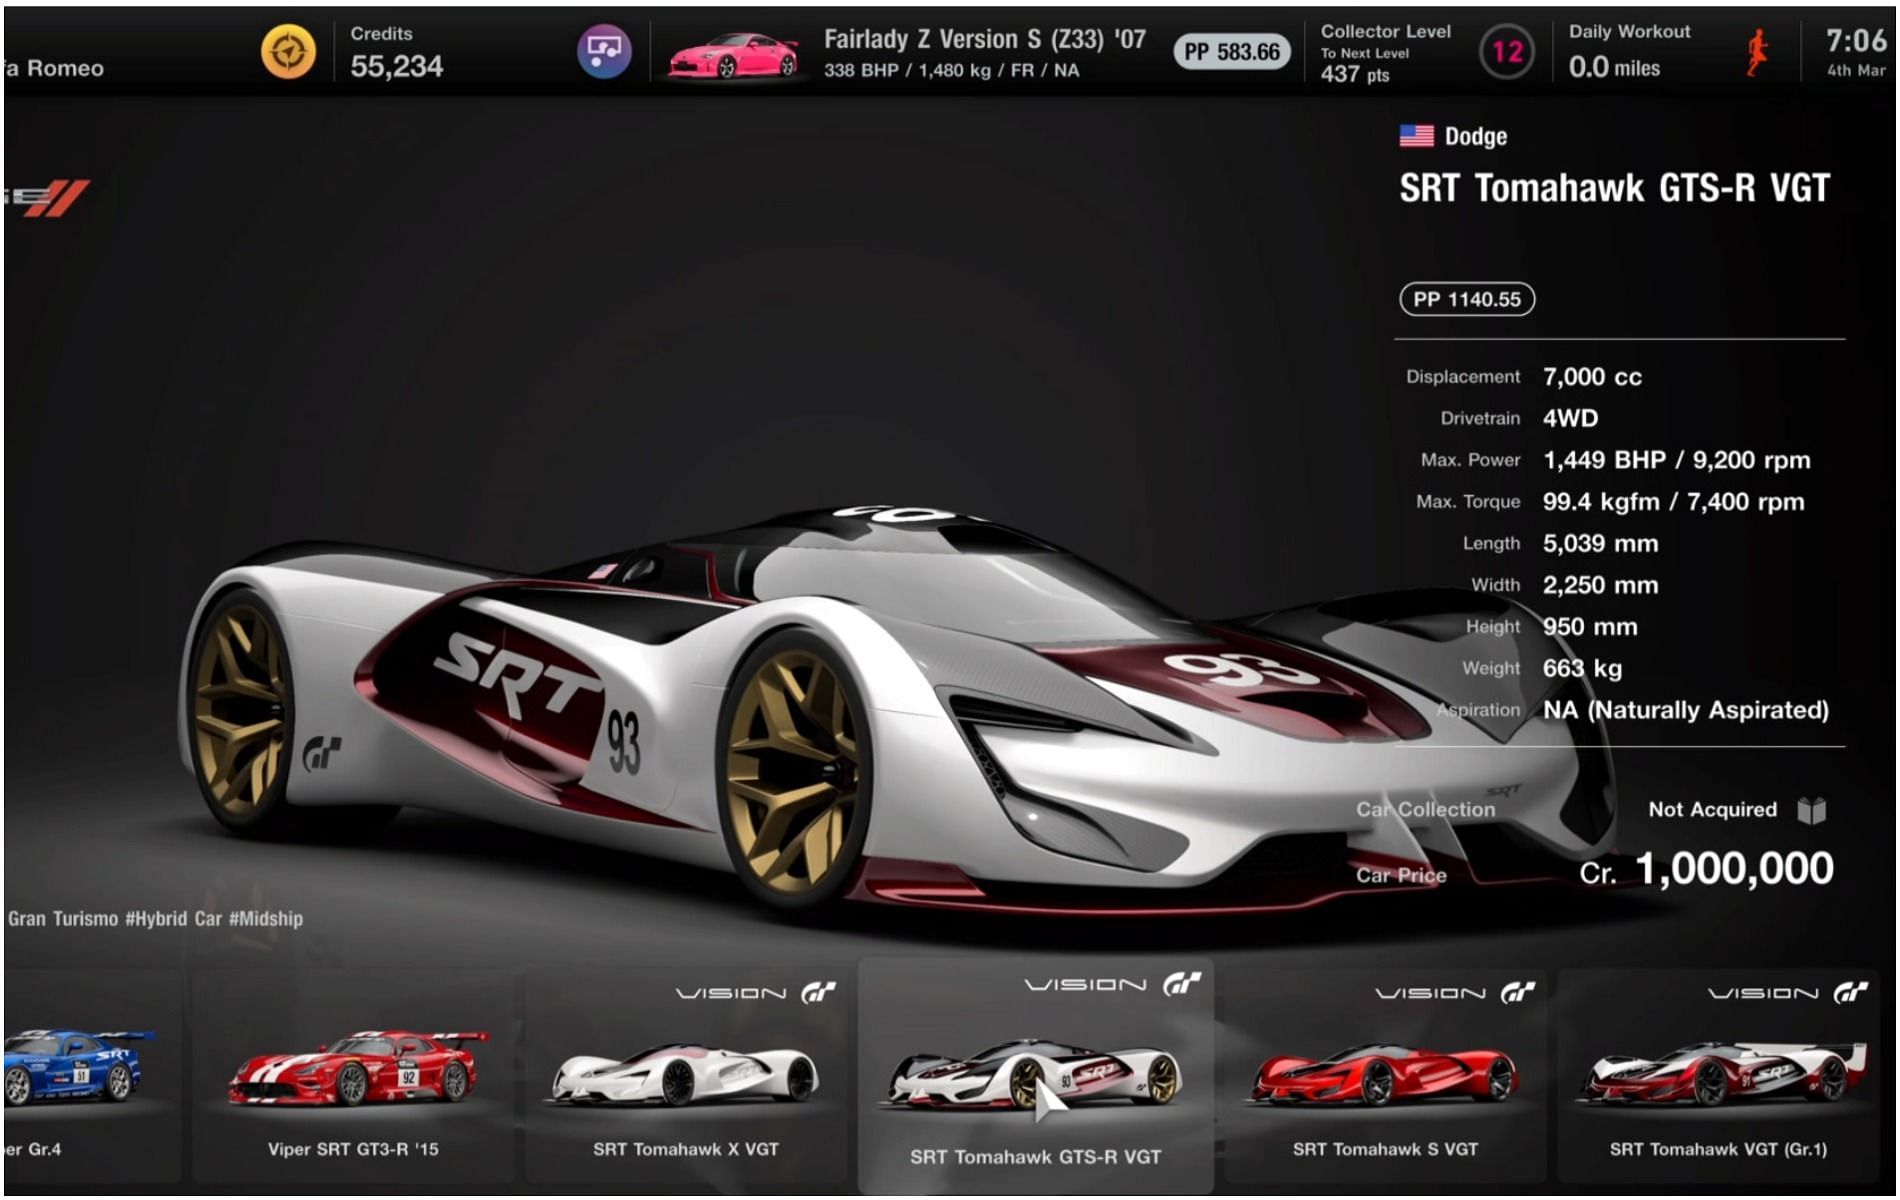 Ford GT LM Race Car, Gran Turismo Wiki